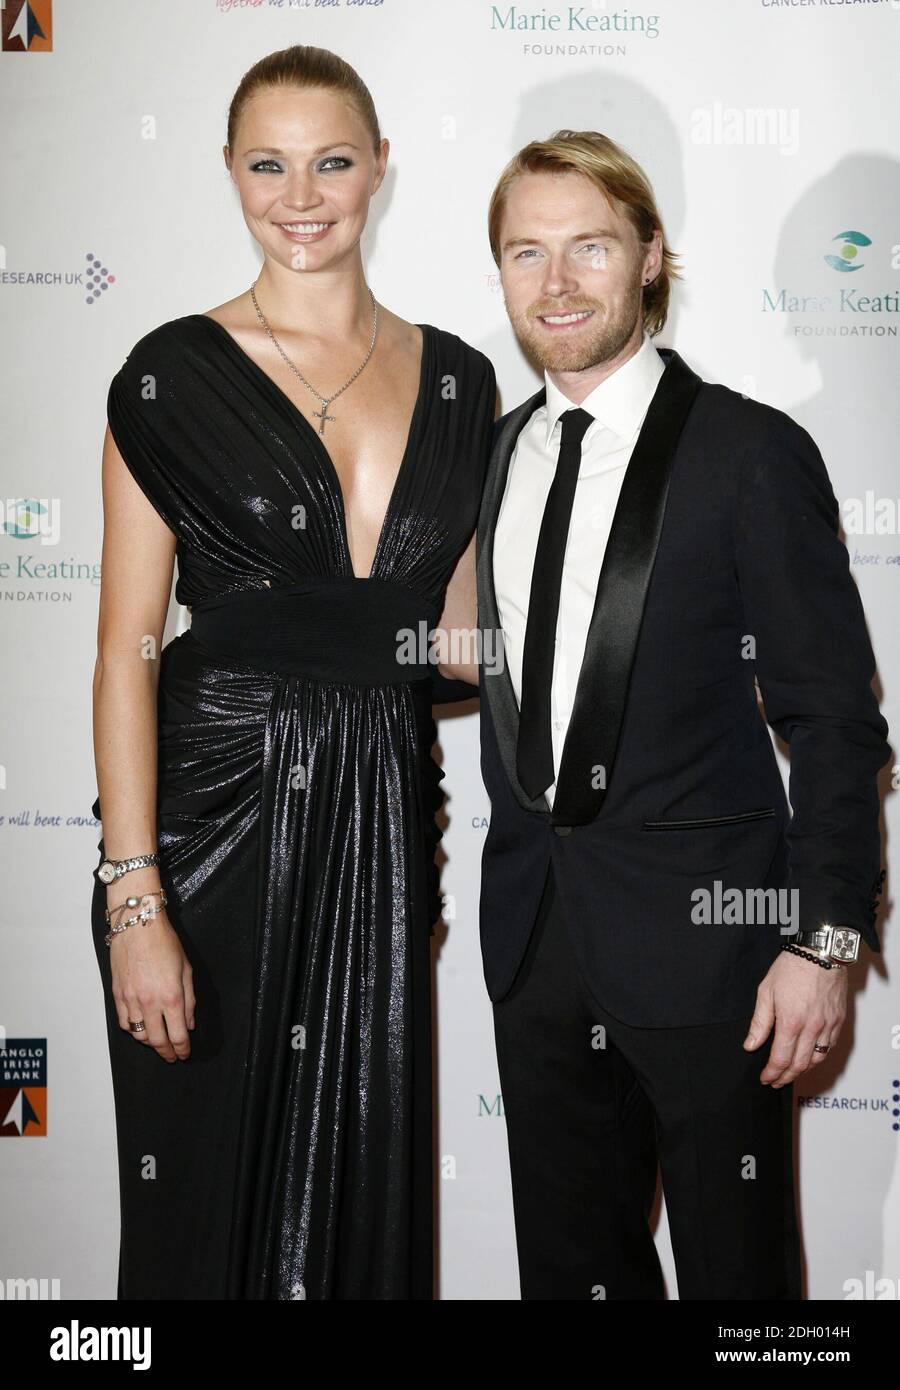 Jodie Kidd and Ronan Keating arriving at the Emeralds and Ivy Ball in aid of Cancer Research UK and The Marie Keating Foundation, Old Billingsgate Market, London. Stock Photo